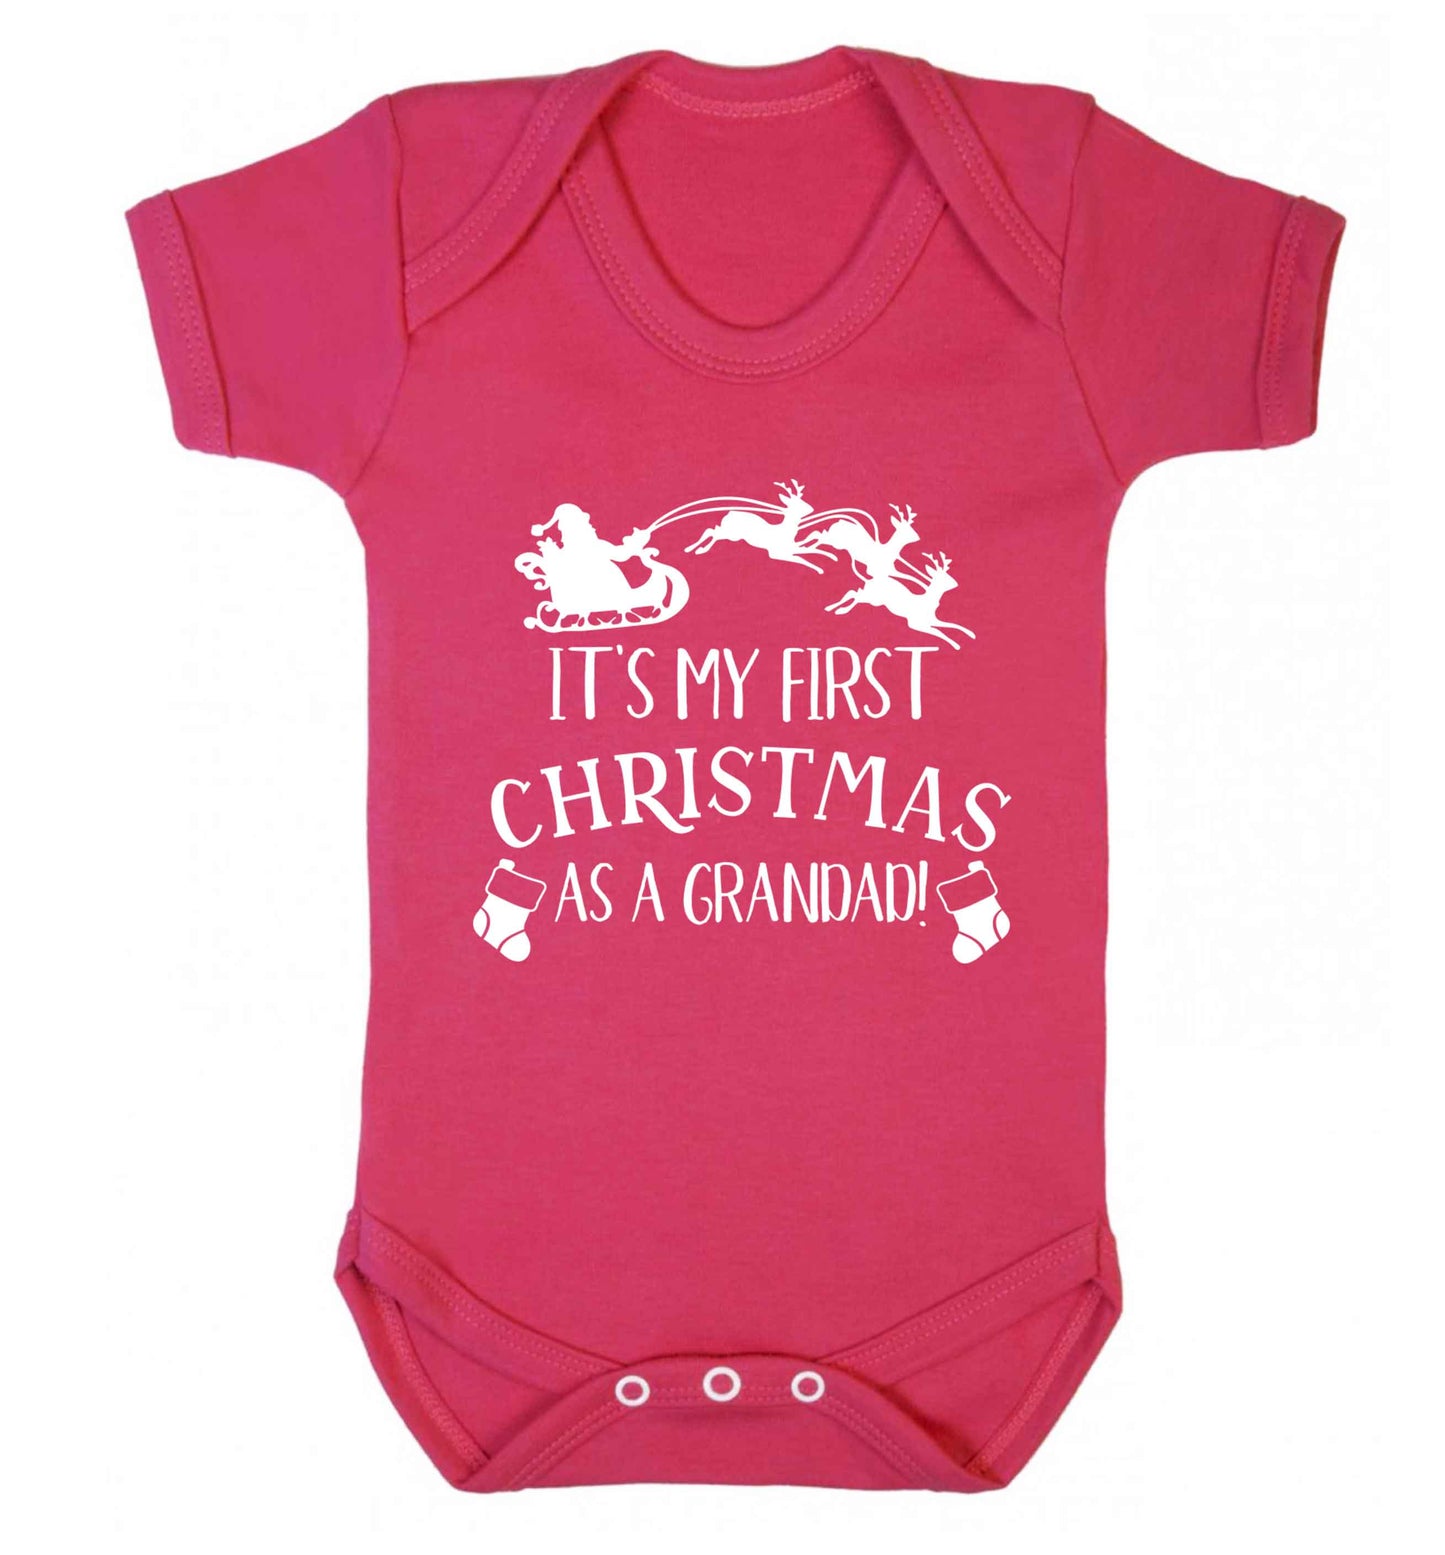 It's my first Christmas as a grandad! Baby Vest dark pink 18-24 months